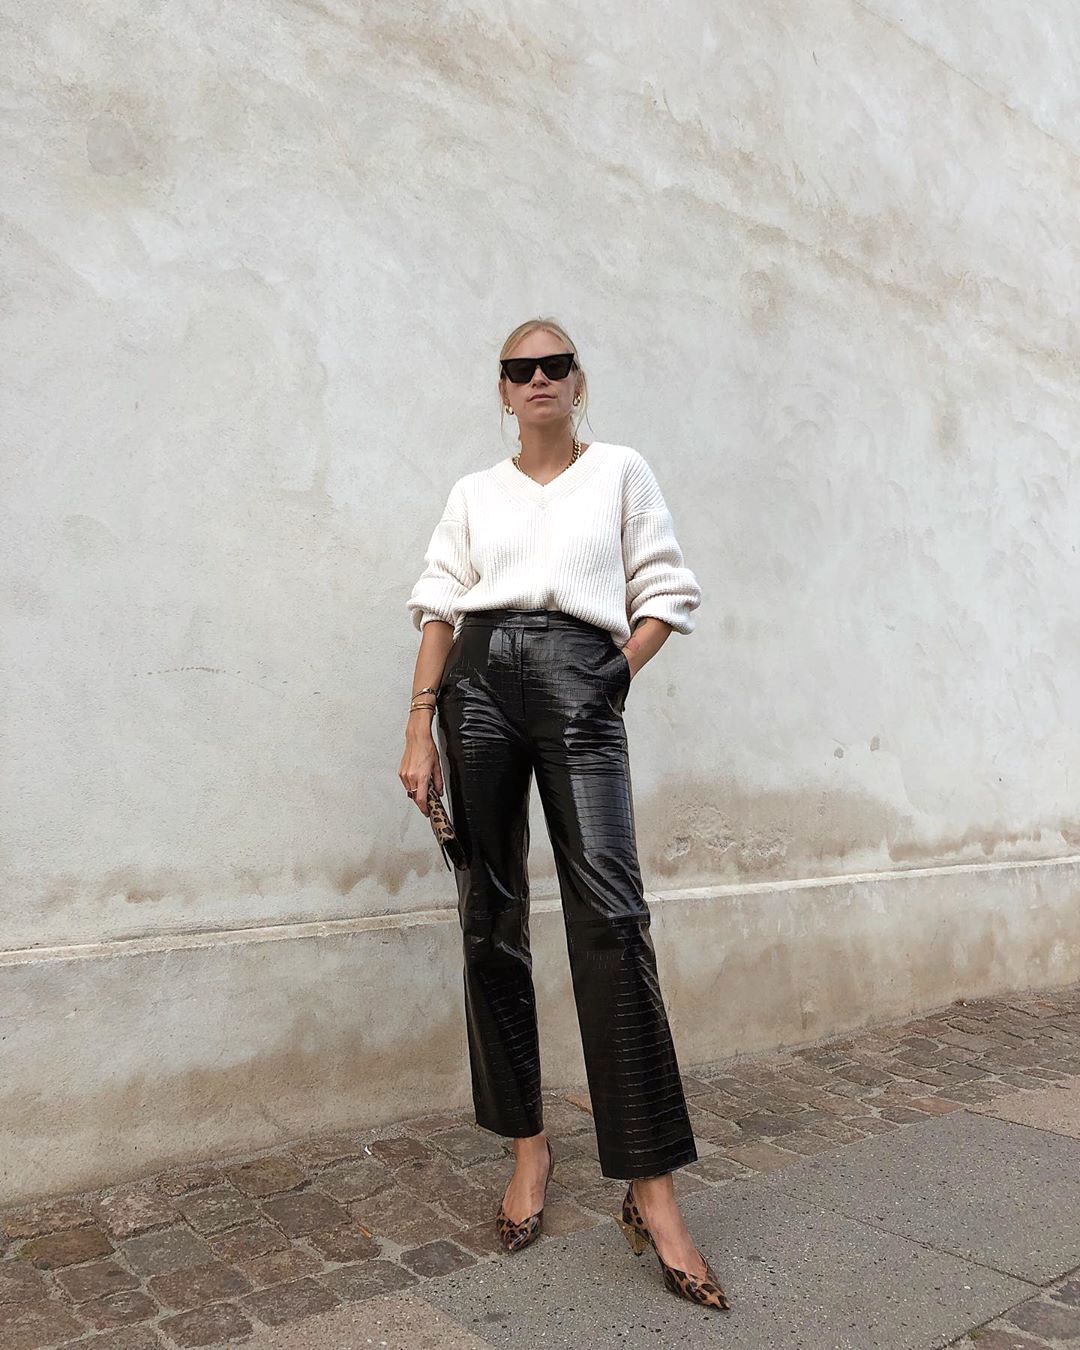 Le Fashion: A Stylish Way to Transition Patent Leather Pants Into